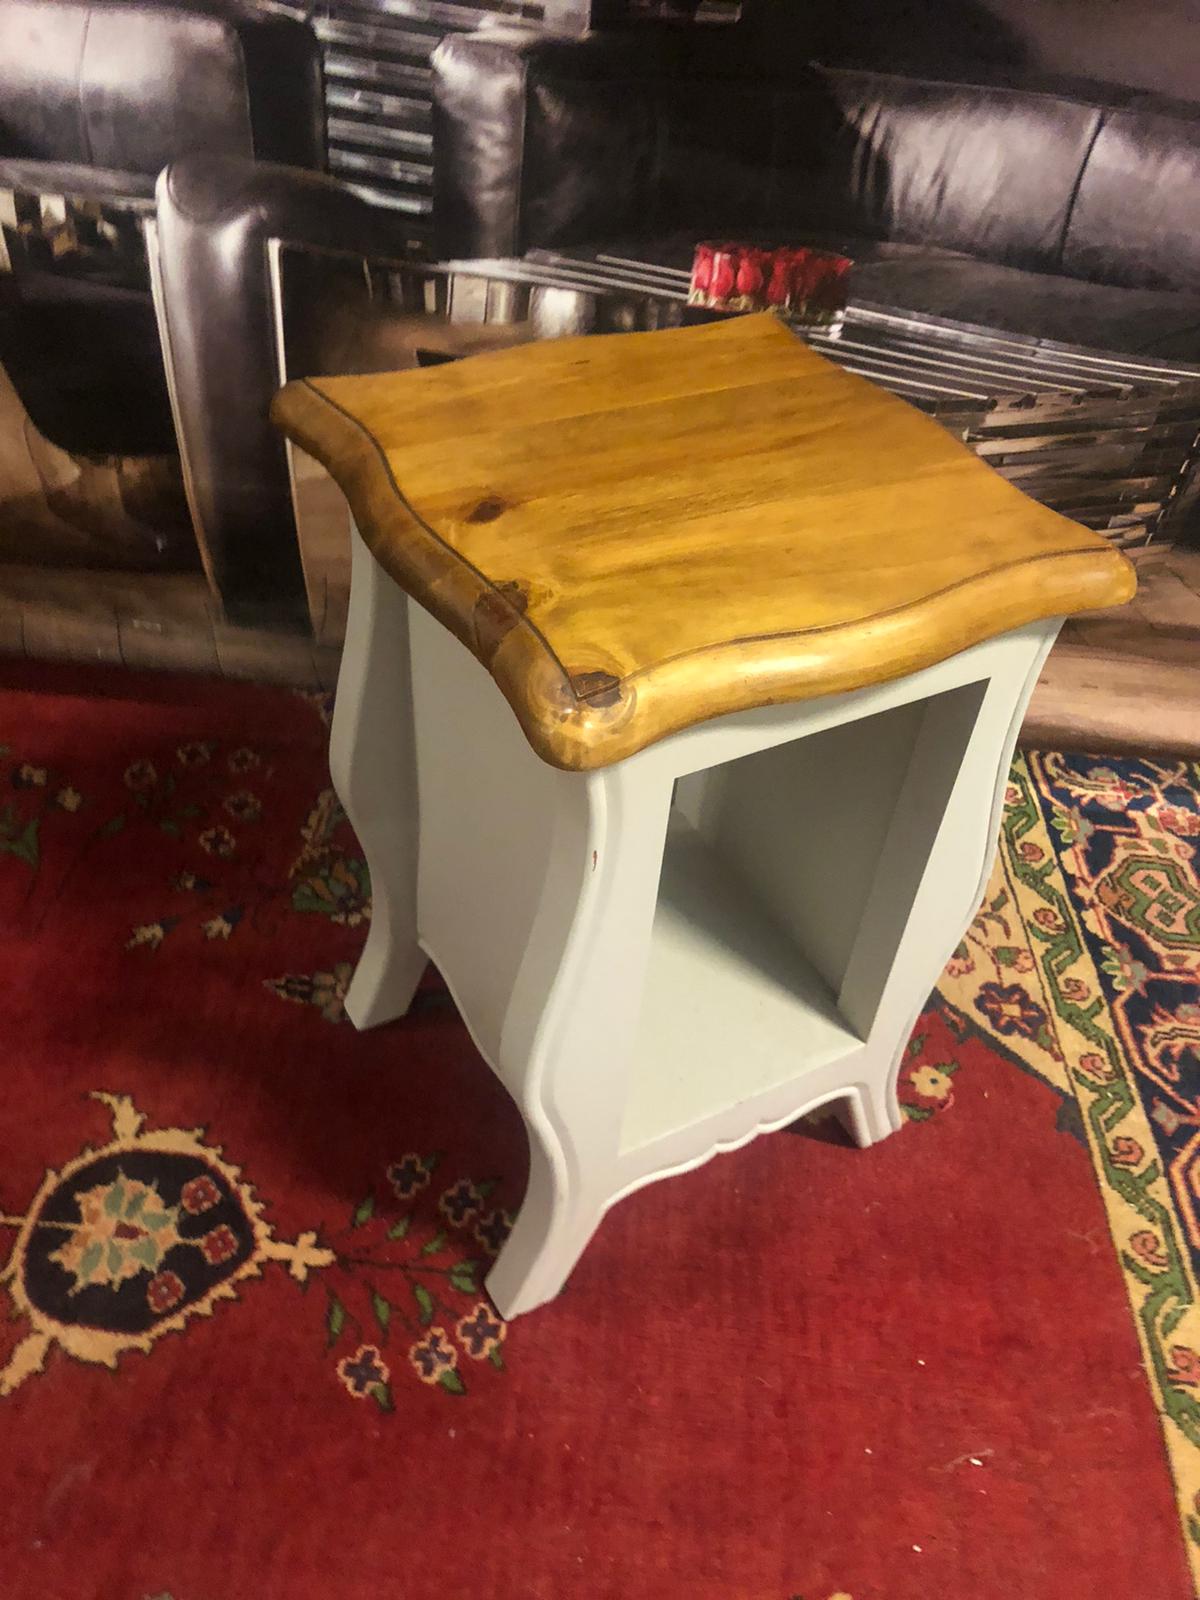 Bluebone Provence Storm Grey Side Table With A Natural Wooden Top And Painted Chic Frame 40 X 40 X